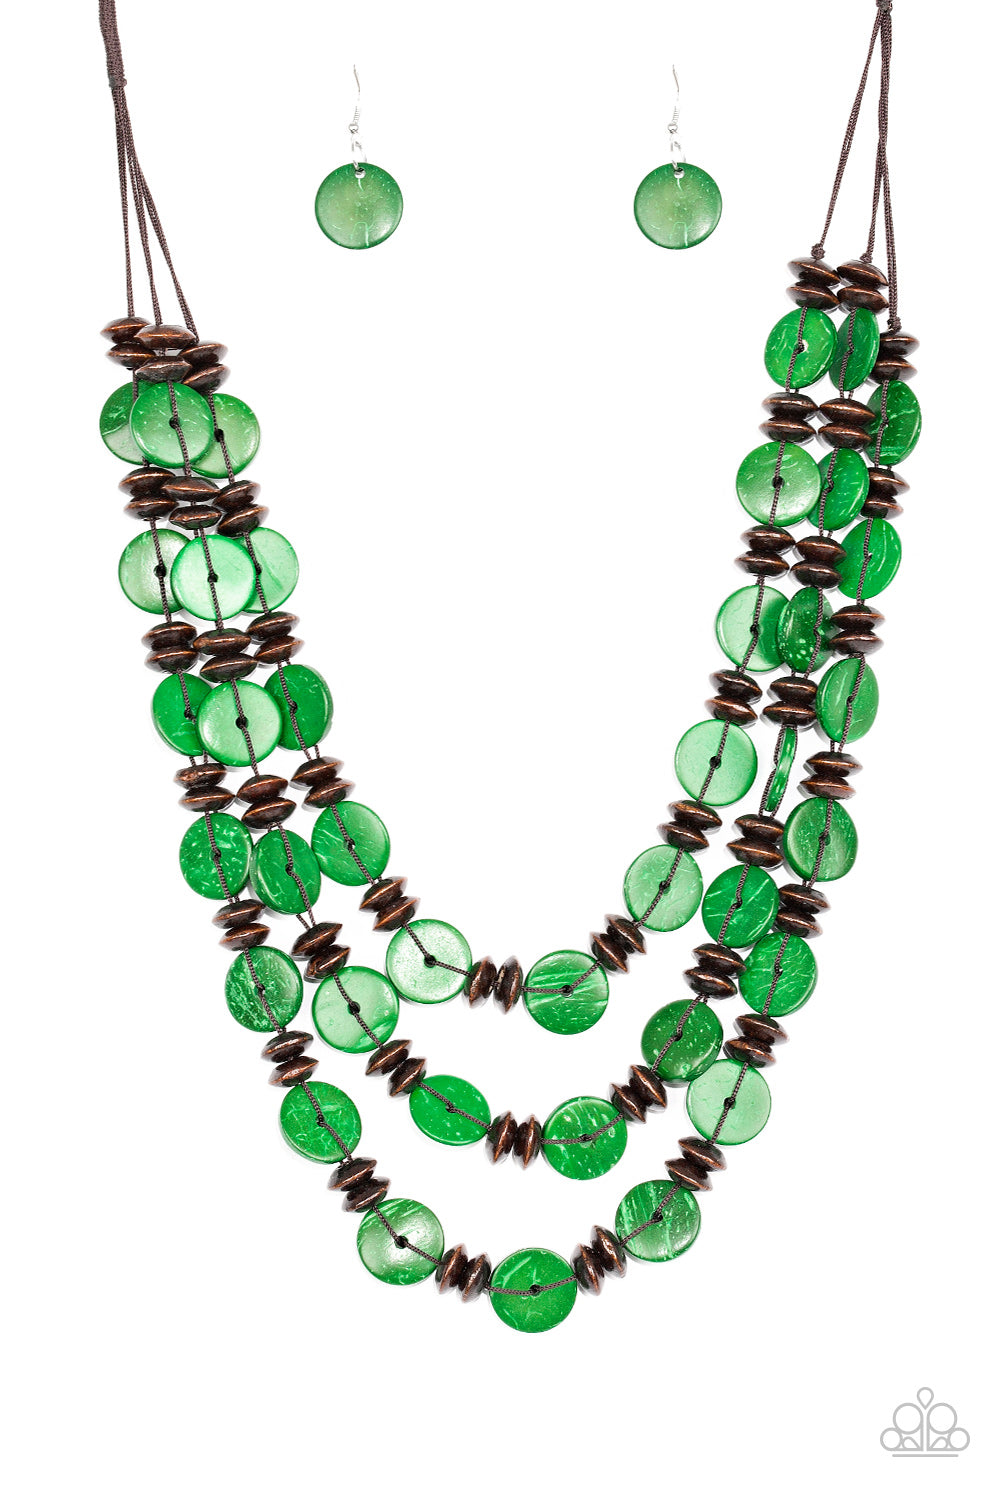 KEY WEST WALKABOUT - GREEN WOODEN NECKLACE